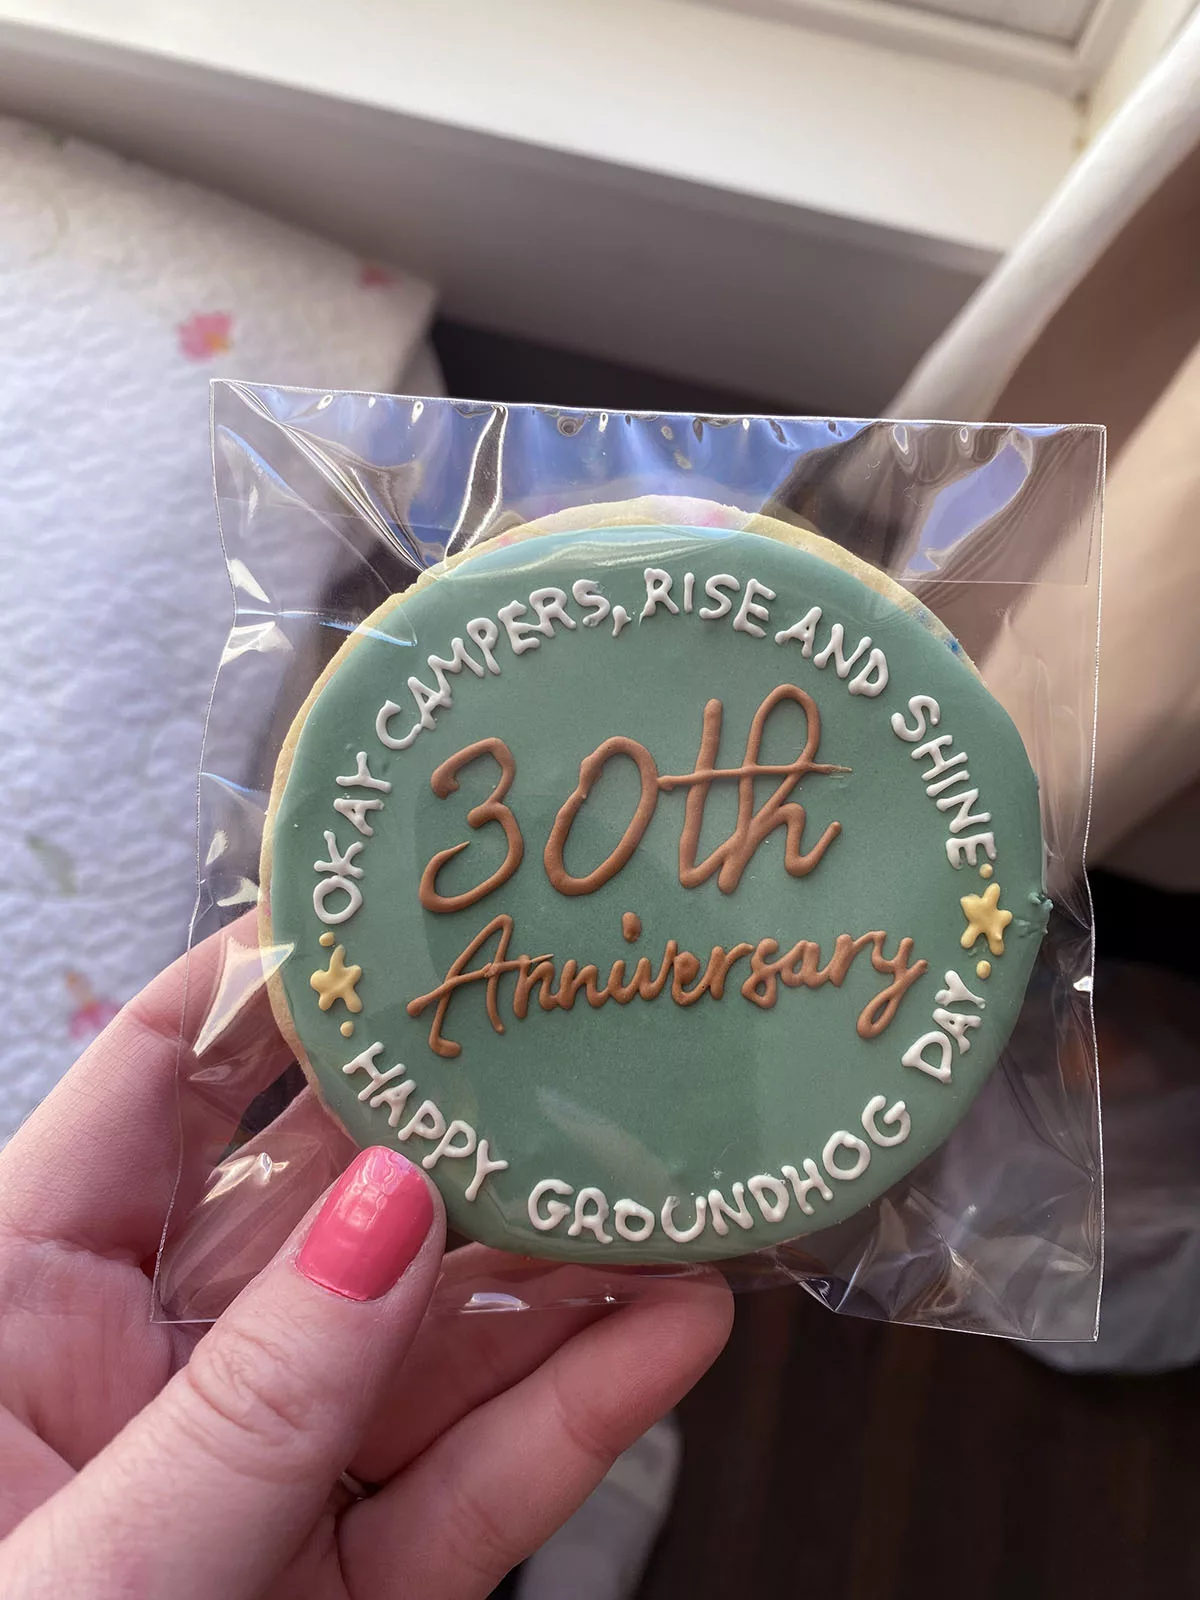 30th anniversary Groundhog Day cookie at the Cherry Tree Inn Bed & Breakfast in Woodstock, Illinois